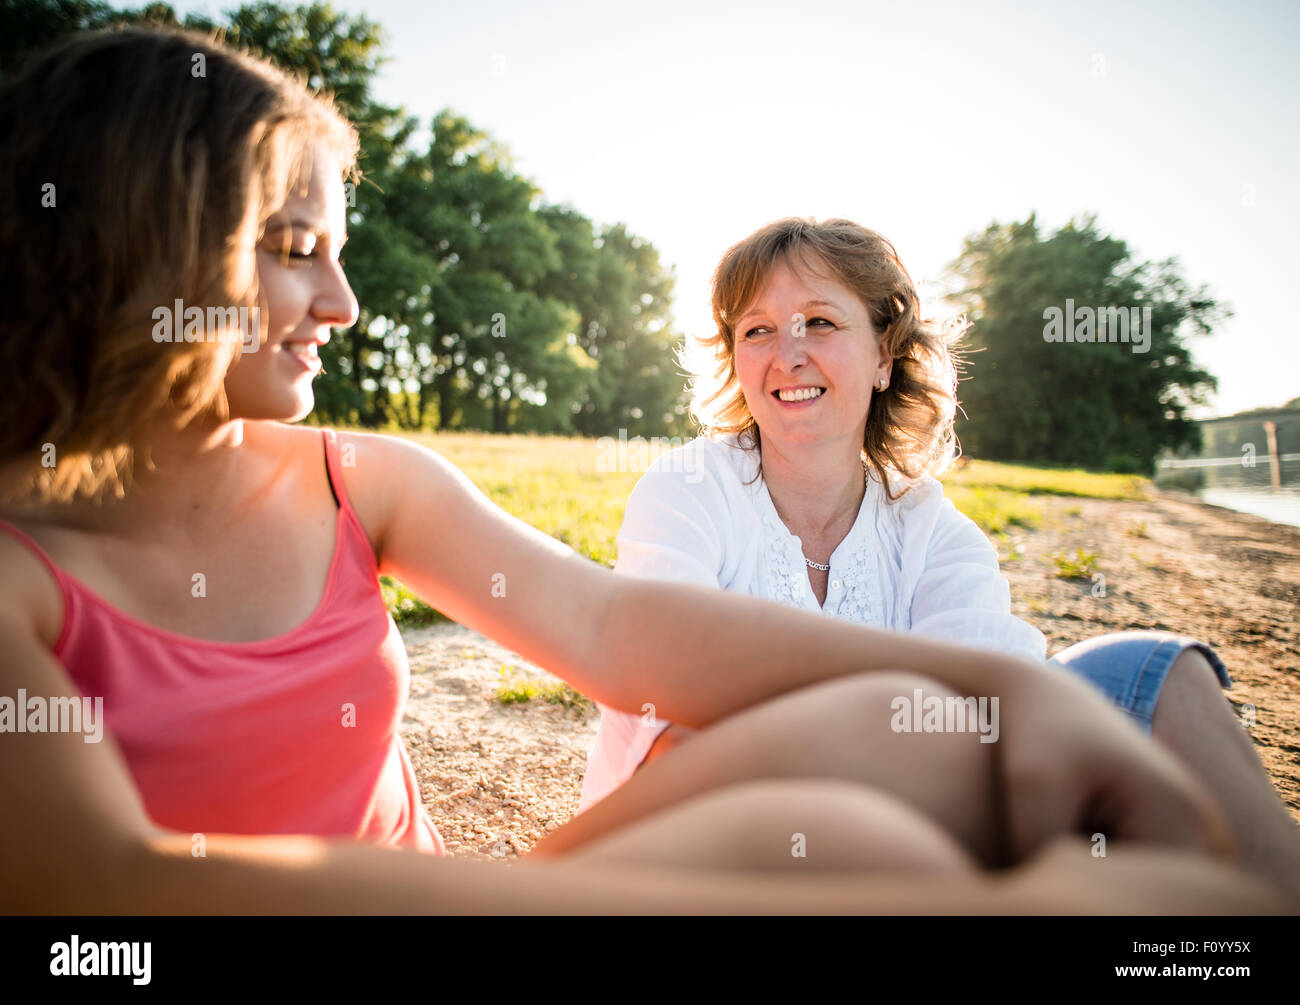 Wide angle photo of teen girl with her mature mother talking together, outdoor in nature Stock Photo